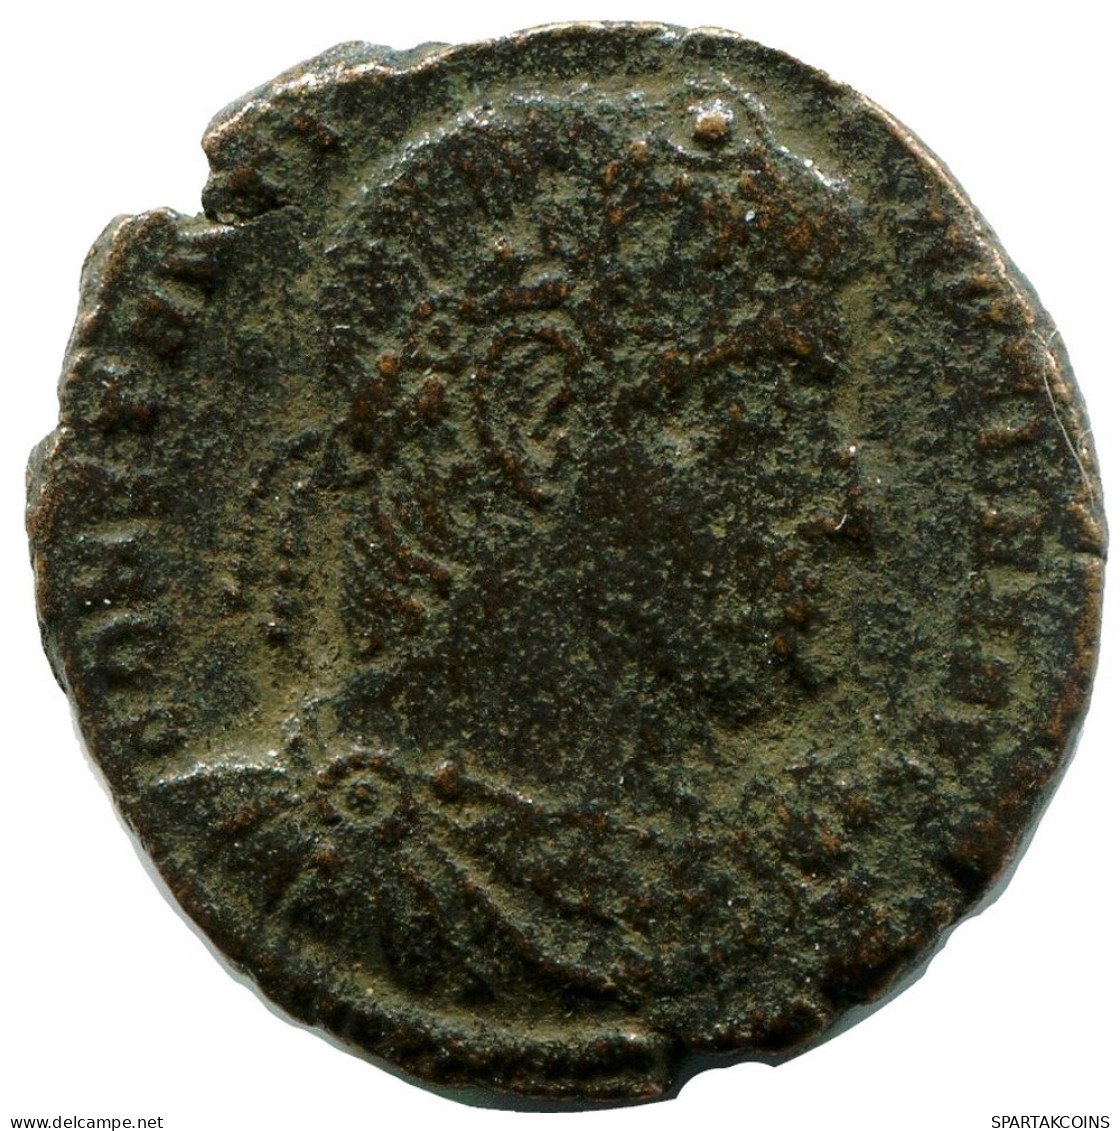 CONSTANTINE I MINTED IN ROME ITALY FOUND IN IHNASYAH HOARD EGYPT #ANC11163.14.U.A - El Impero Christiano (307 / 363)